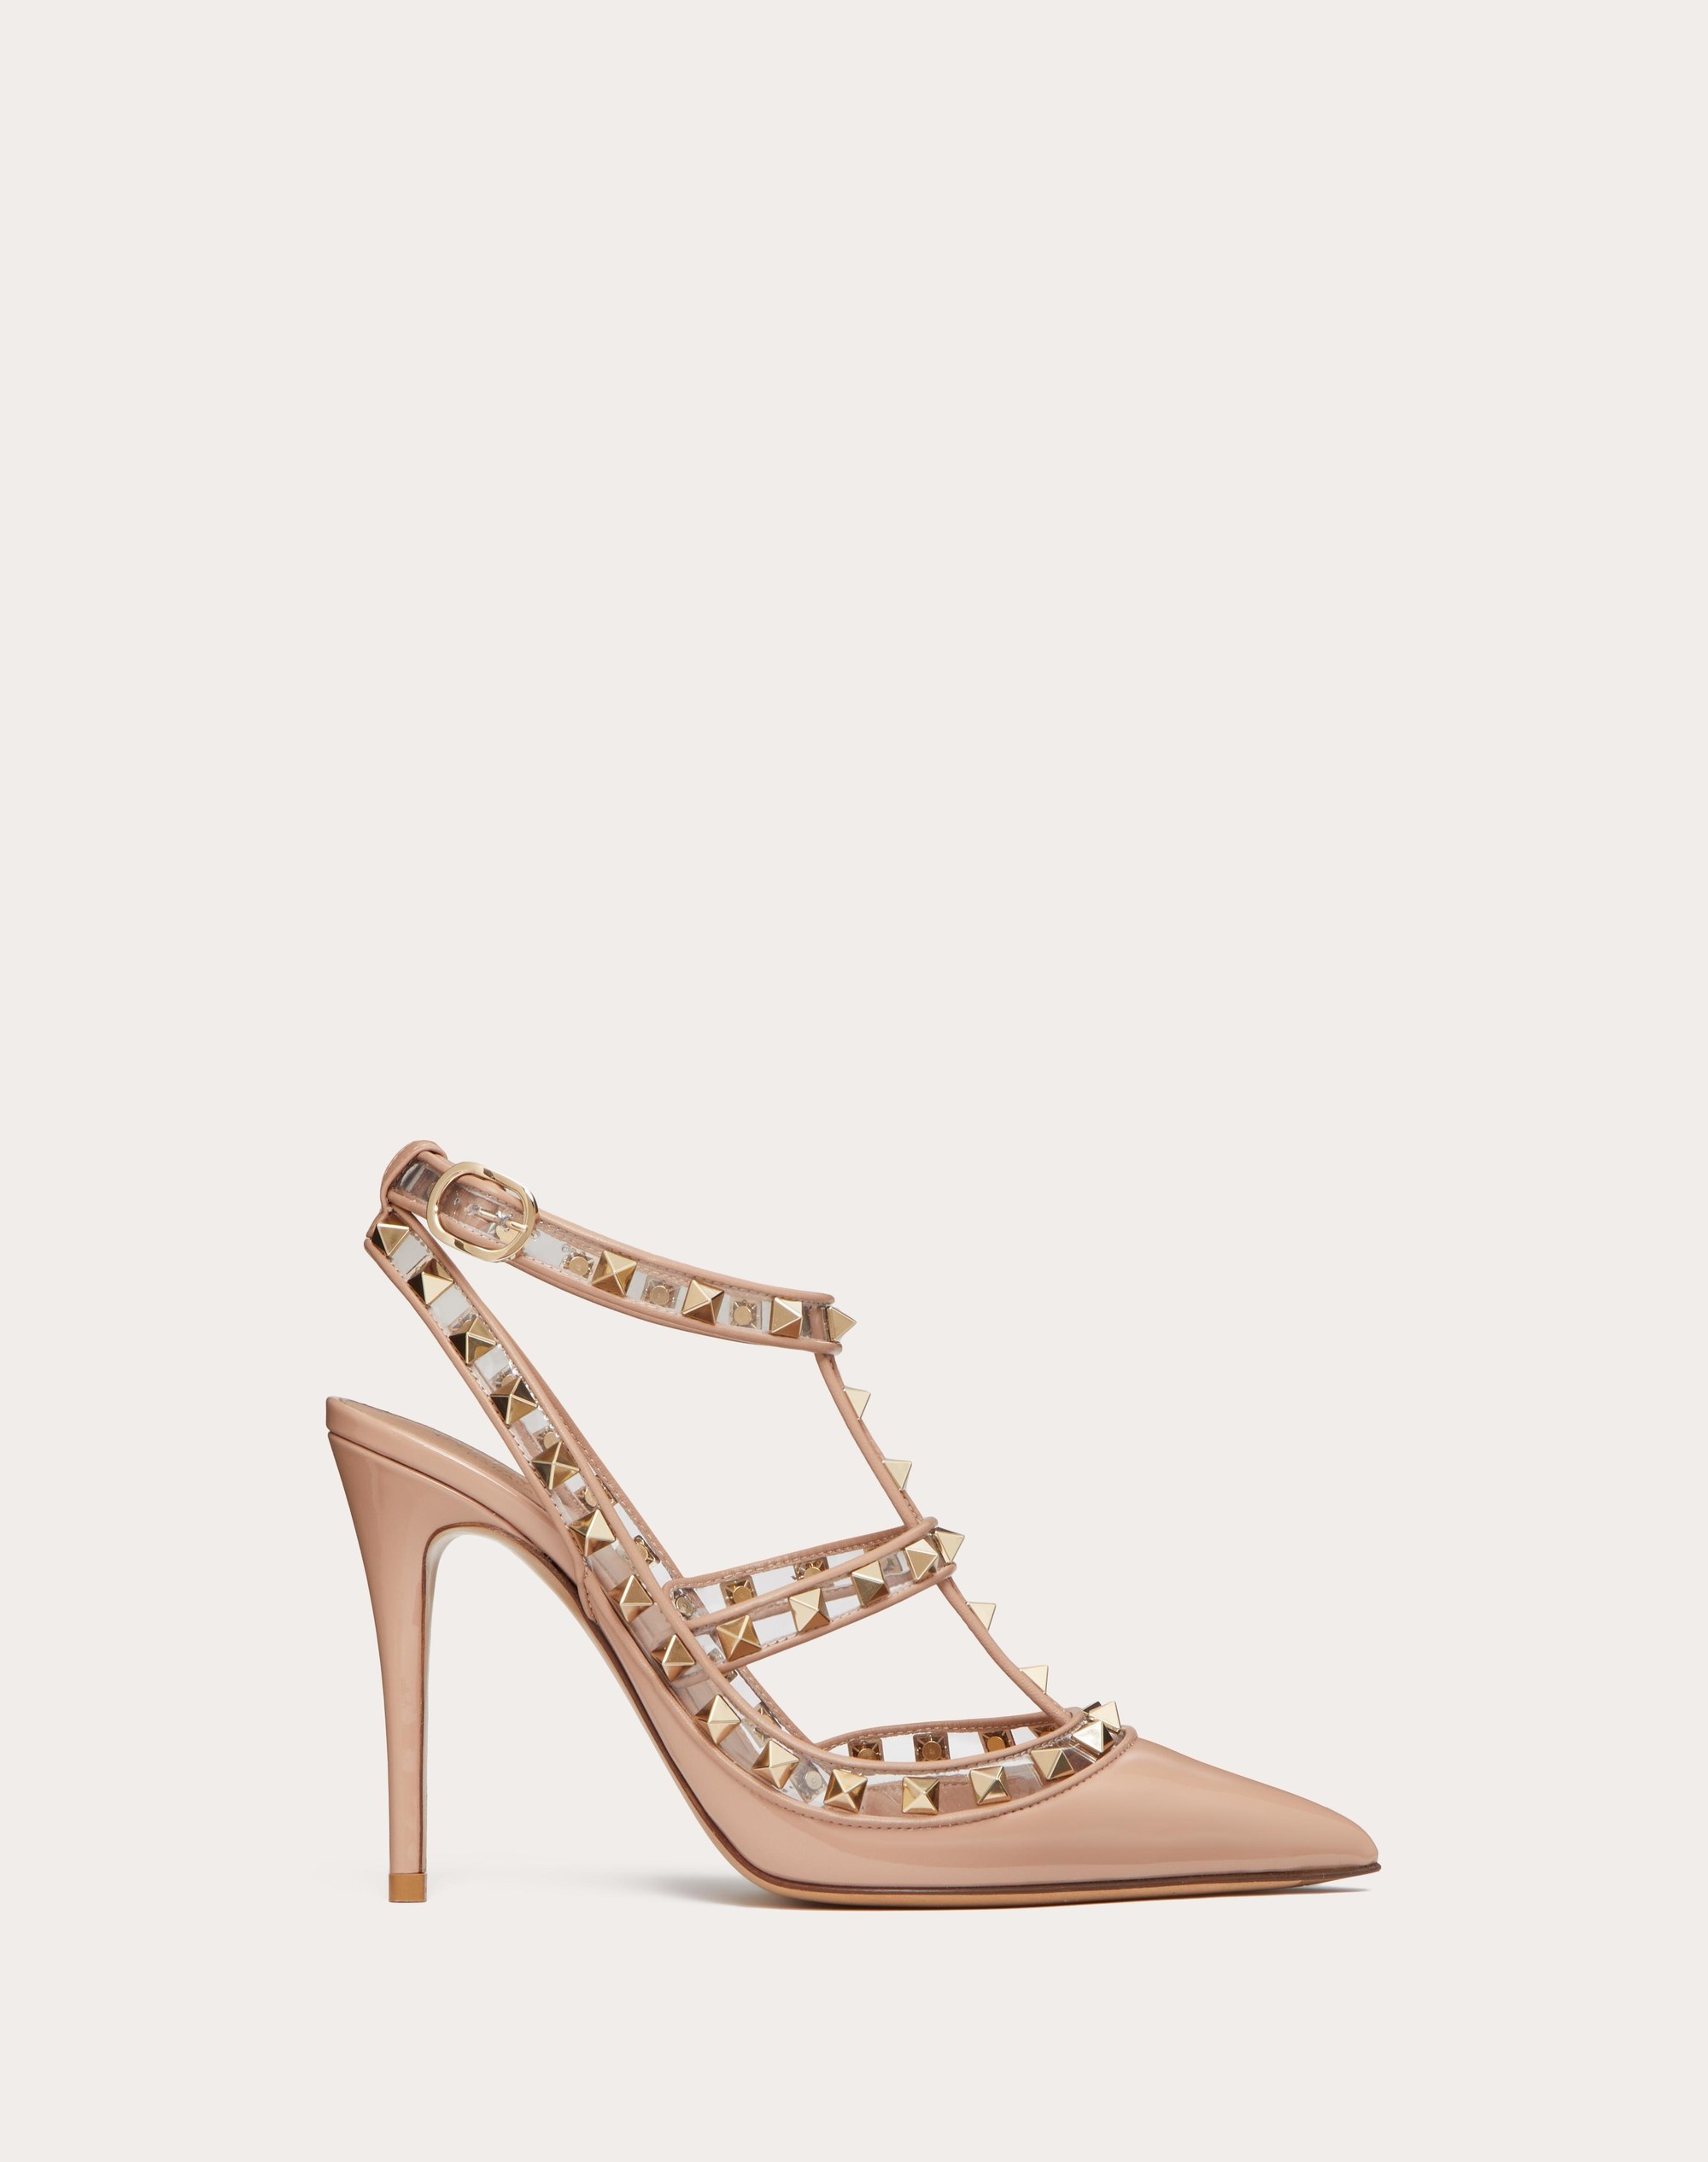 ROCKSTUD PUMPS IN PATENT LEATHER AND POLYMERIC MATERIAL WITH STRAPS 100MM - 1